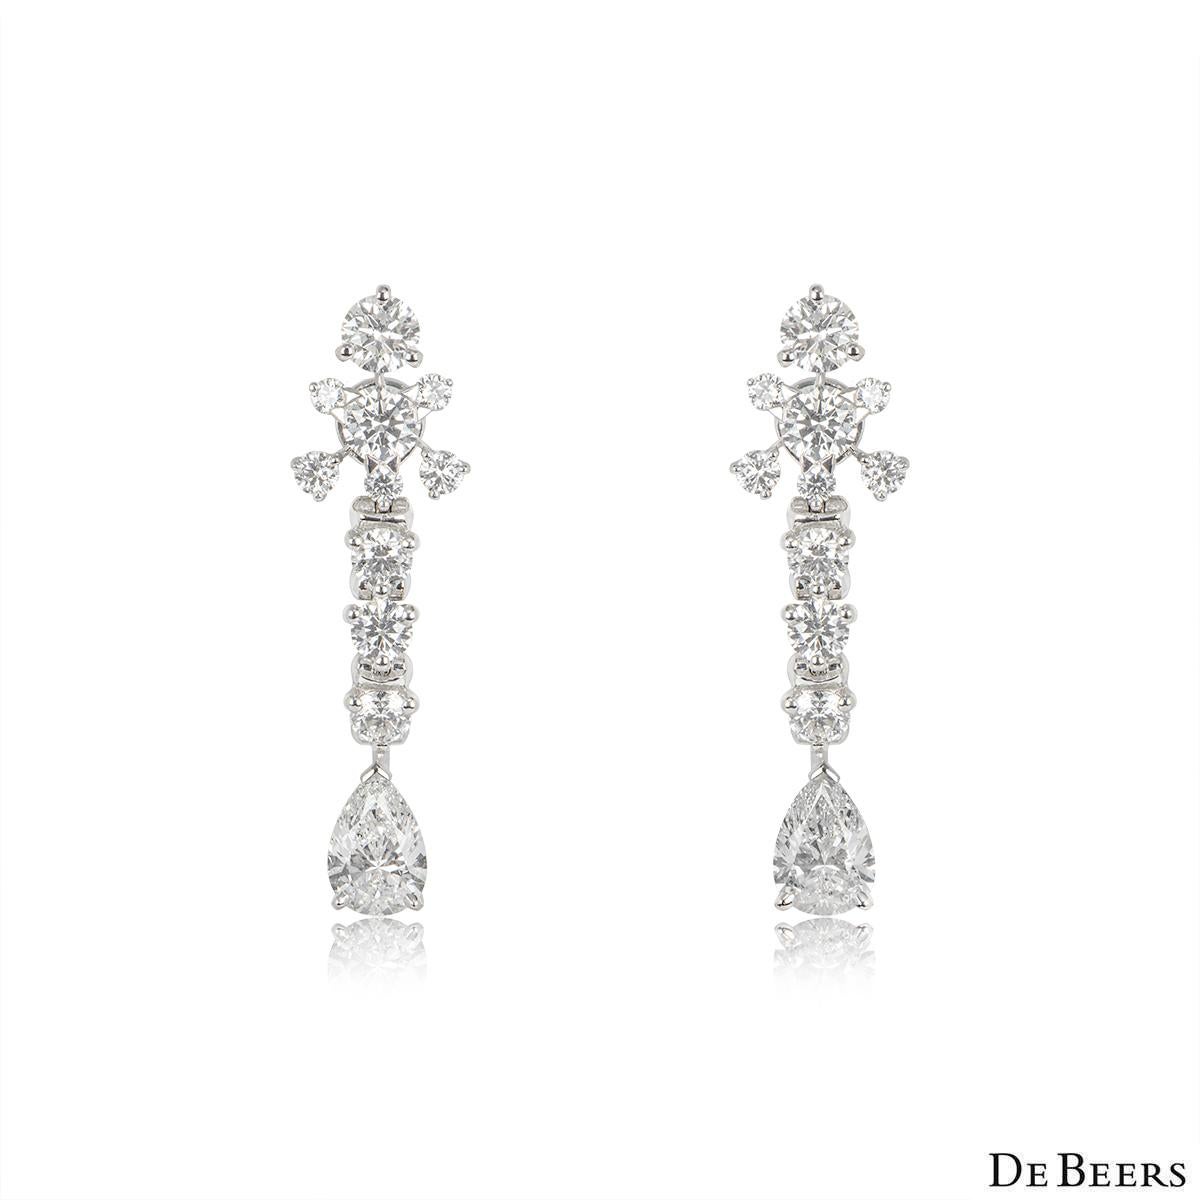 A stunning pair of platinum diamond Lea earrings by De Beers from their Couture Collections. Each earring is prong set to the top with 7 round brilliant cut diamonds in a star motif, followed by 3 round brilliant cut diamonds and a pear cut diamond.